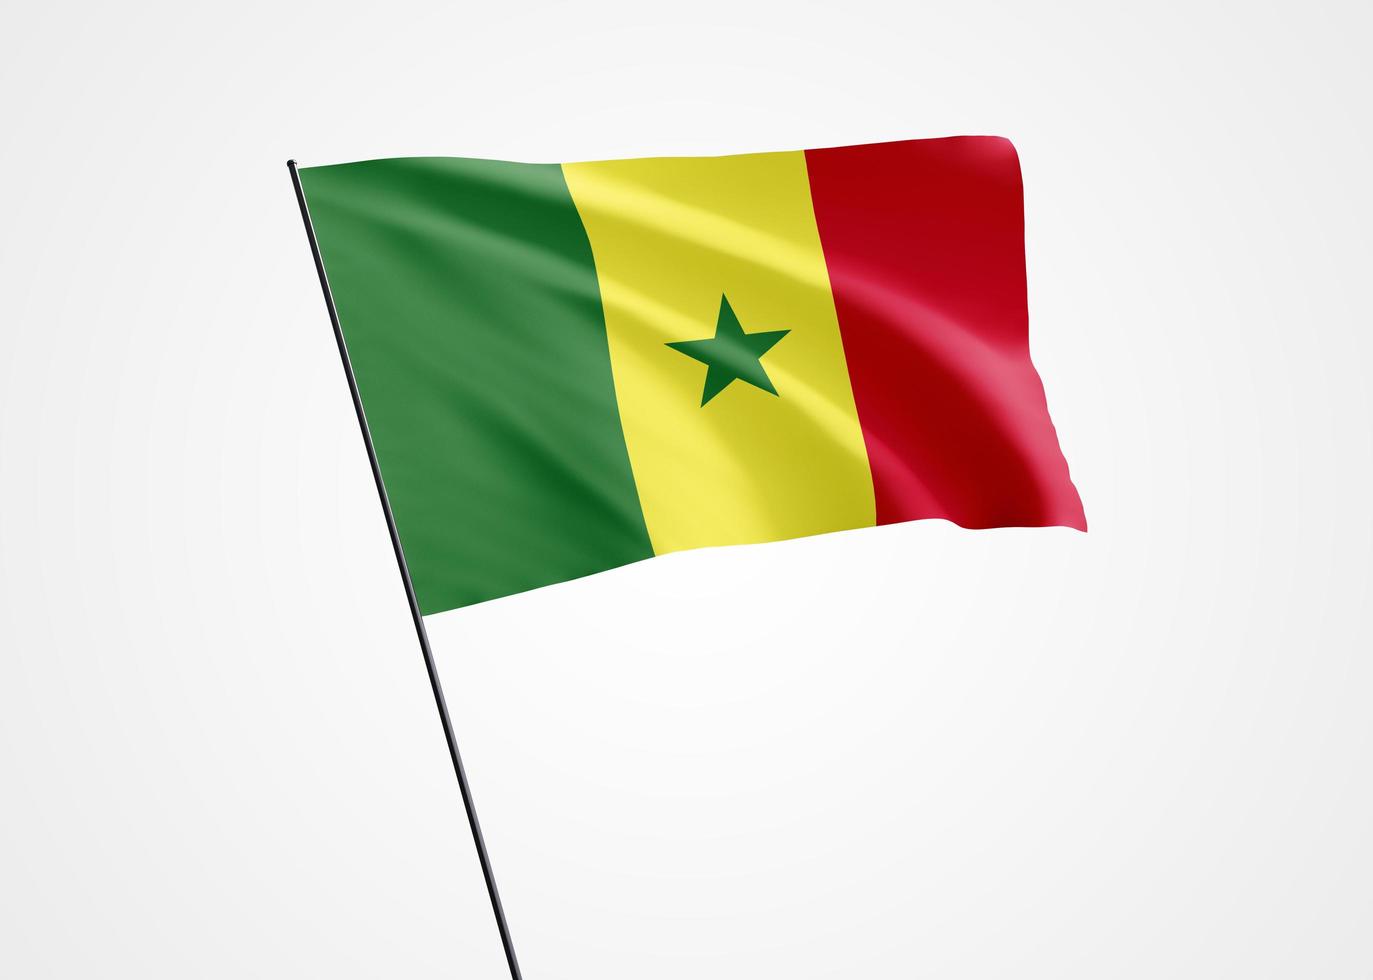 Senegal flag flying high in the white isolated background. April 04 Senegal independence day. World national flag collection world national flag collection photo